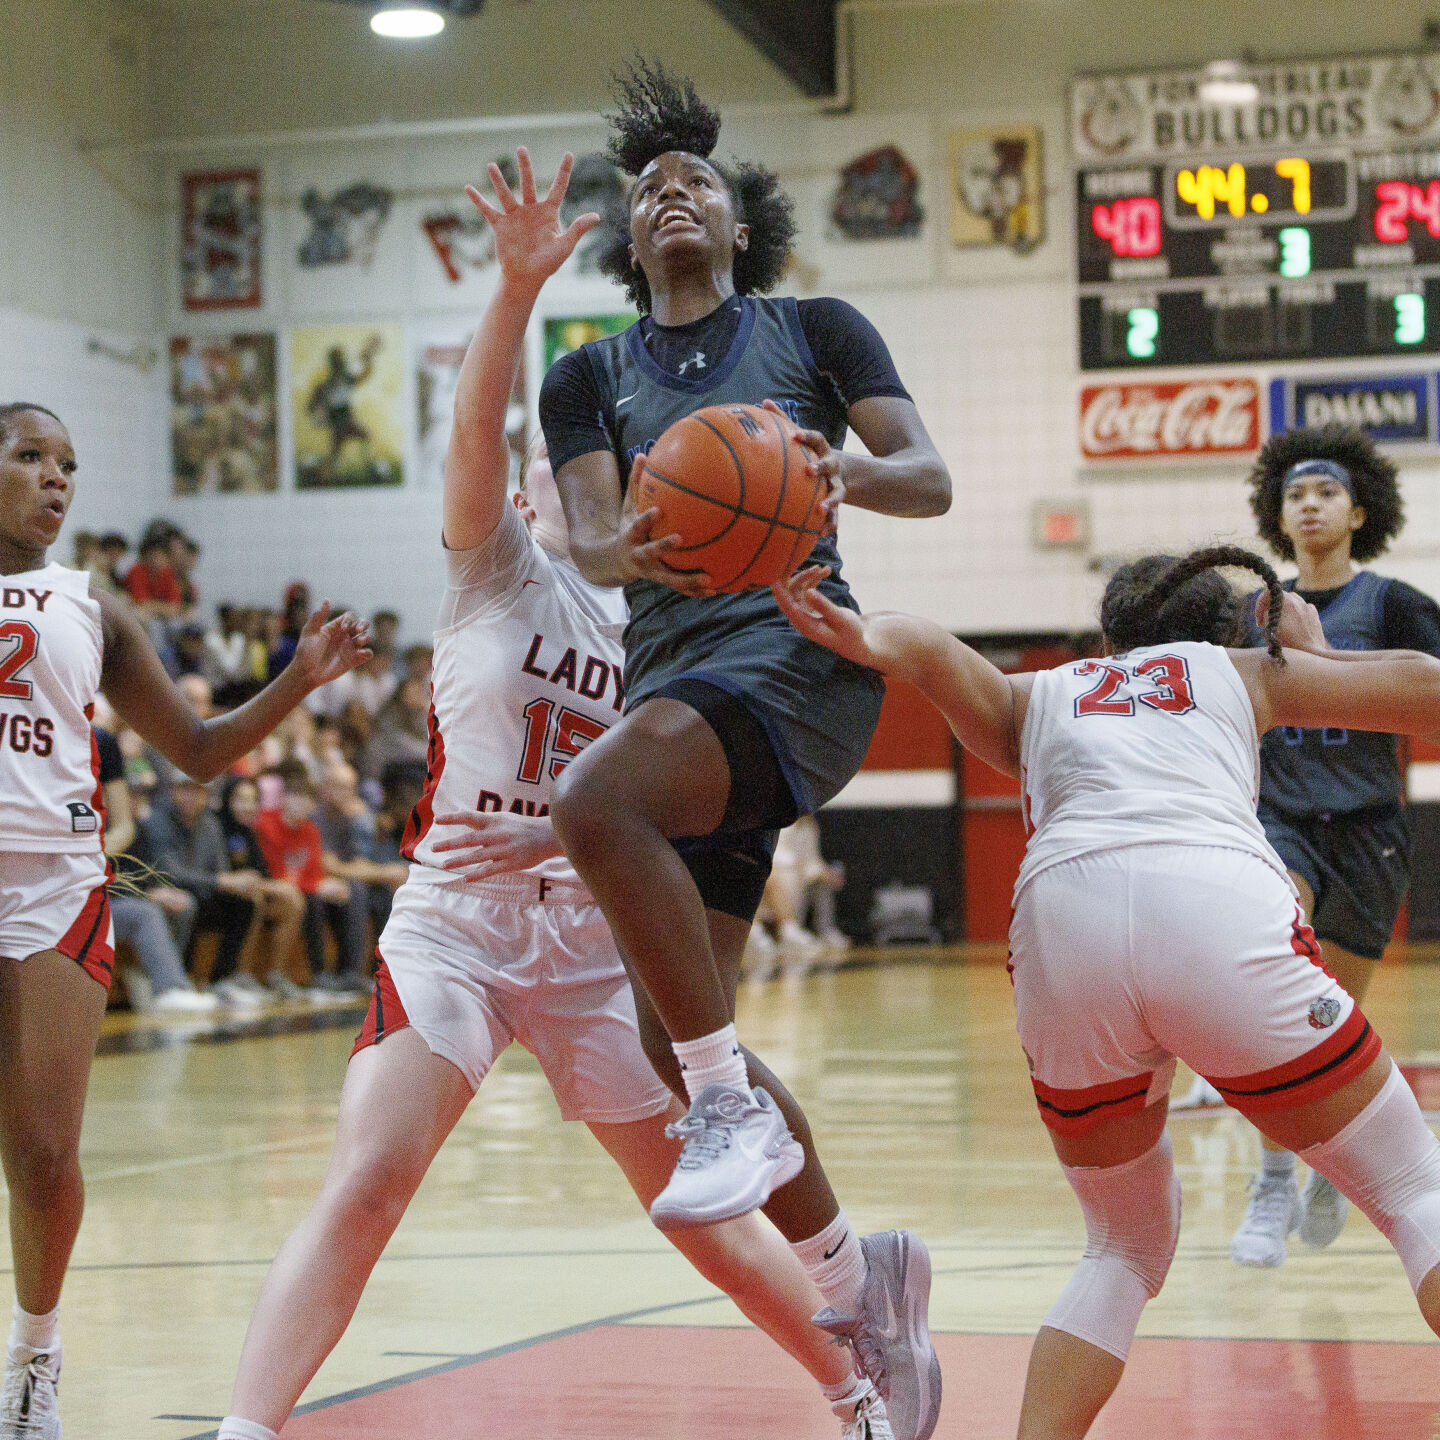 Vote for the Northshore Girls Athlete of the Week: Elizabeth Barth, Camille Boudreaux, Carlie Perrin, Cherie Spencer, Aliyah Stone, or Arionna White?